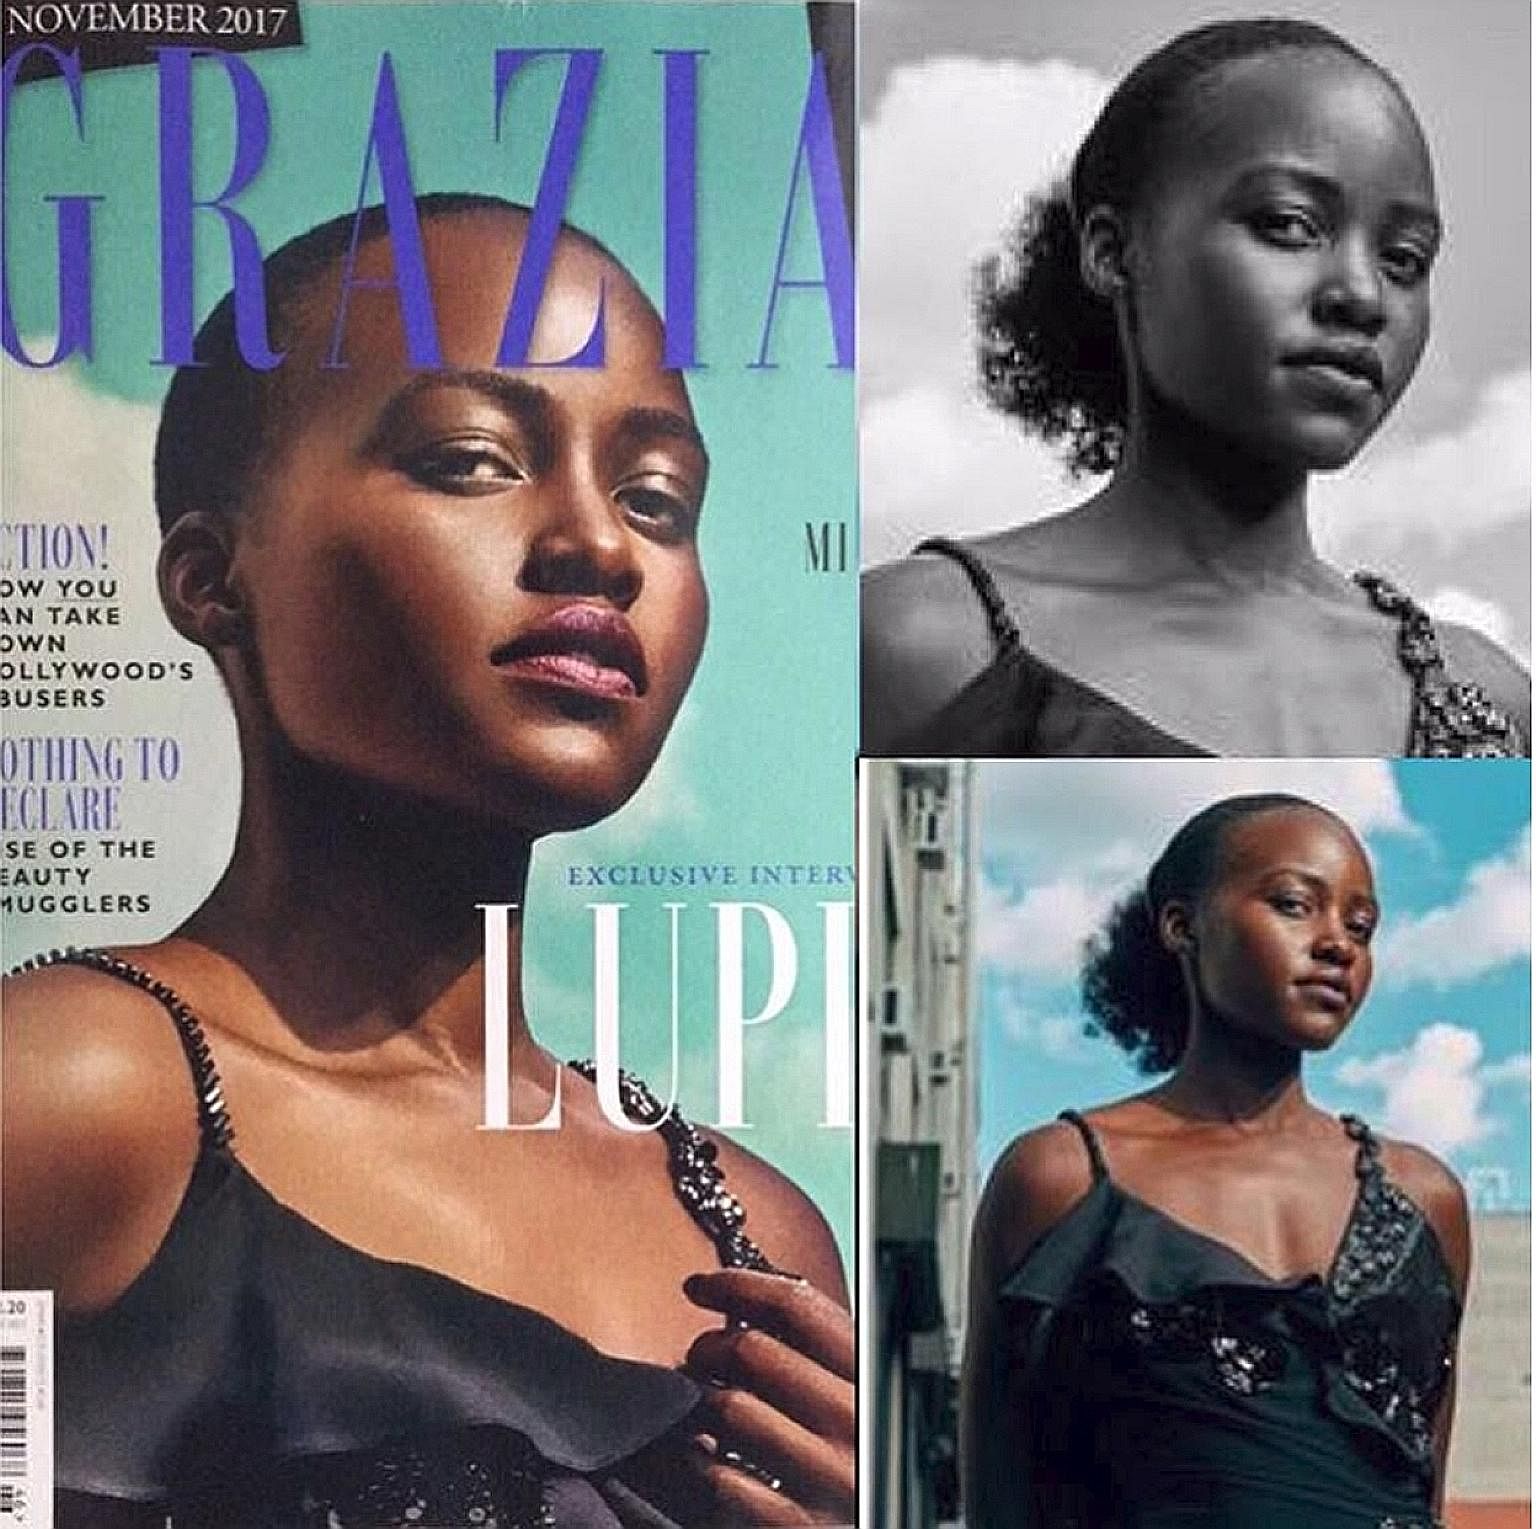 Actress Lupita Nyong'o's mass of curly black hair, held in a thick ponytail at the back of her neck in the original photograph, was gone in an altered image on the cover of the magazine Grazia UK.